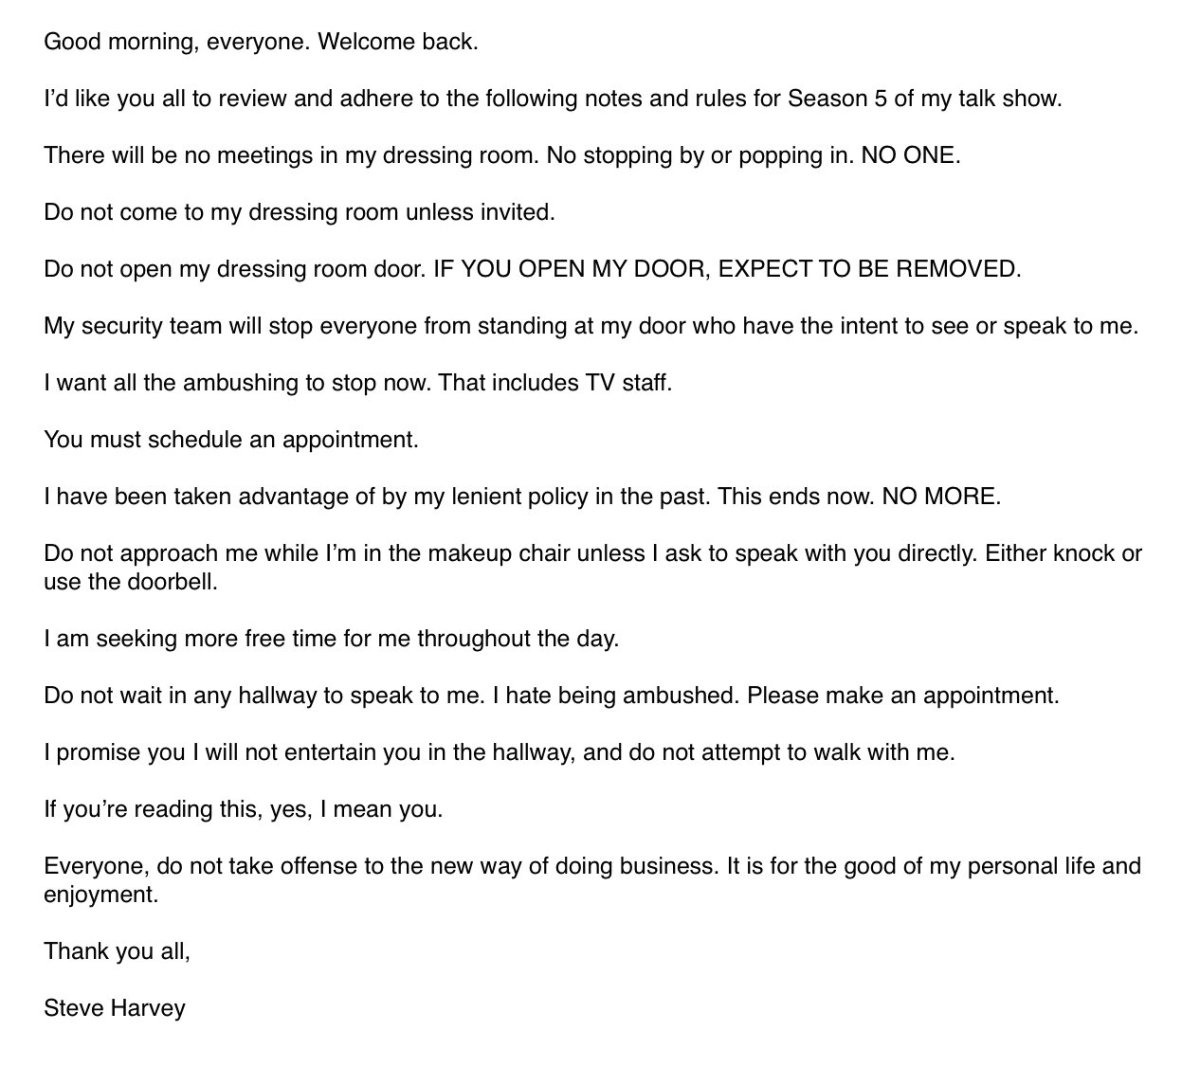 Steve Harvey Writes E-mail to Entire Staff: Demands They Leave Him the Hell Alone